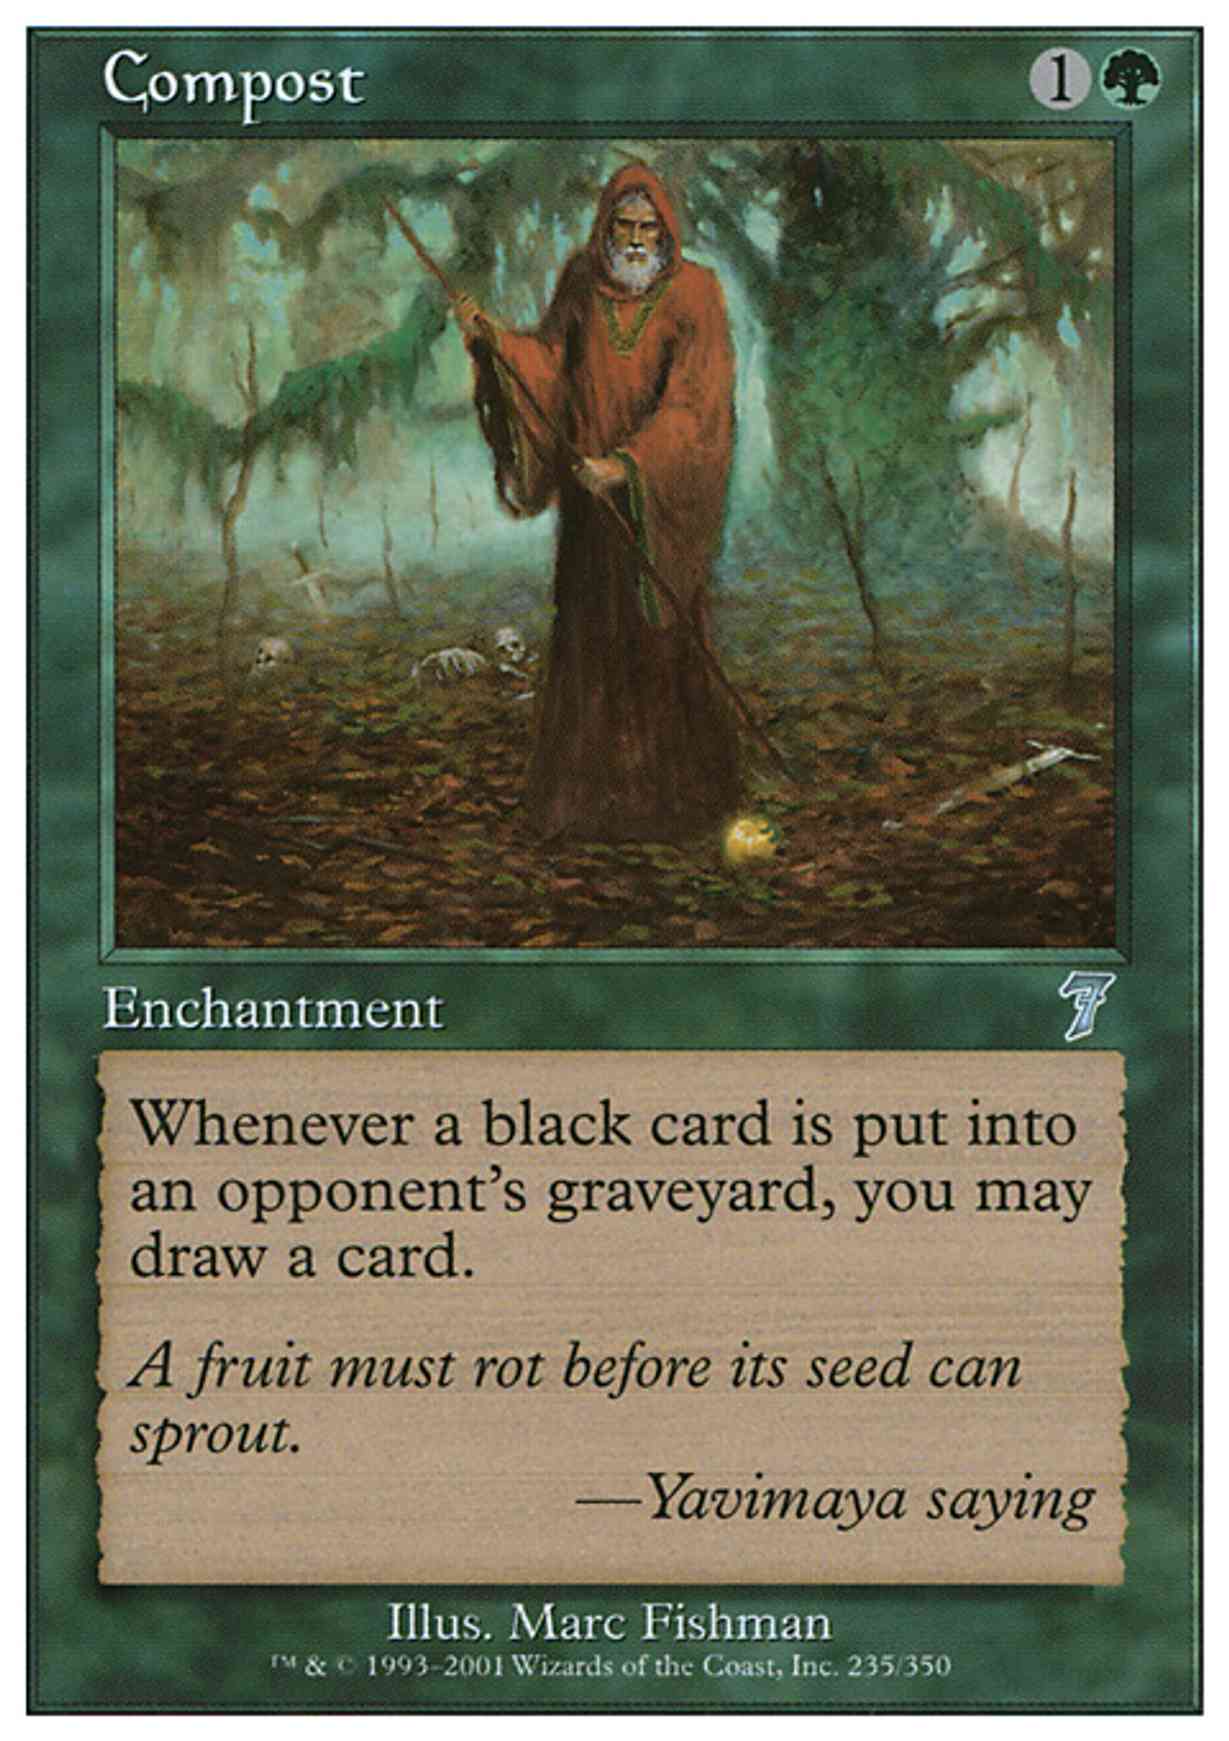 Compost magic card front